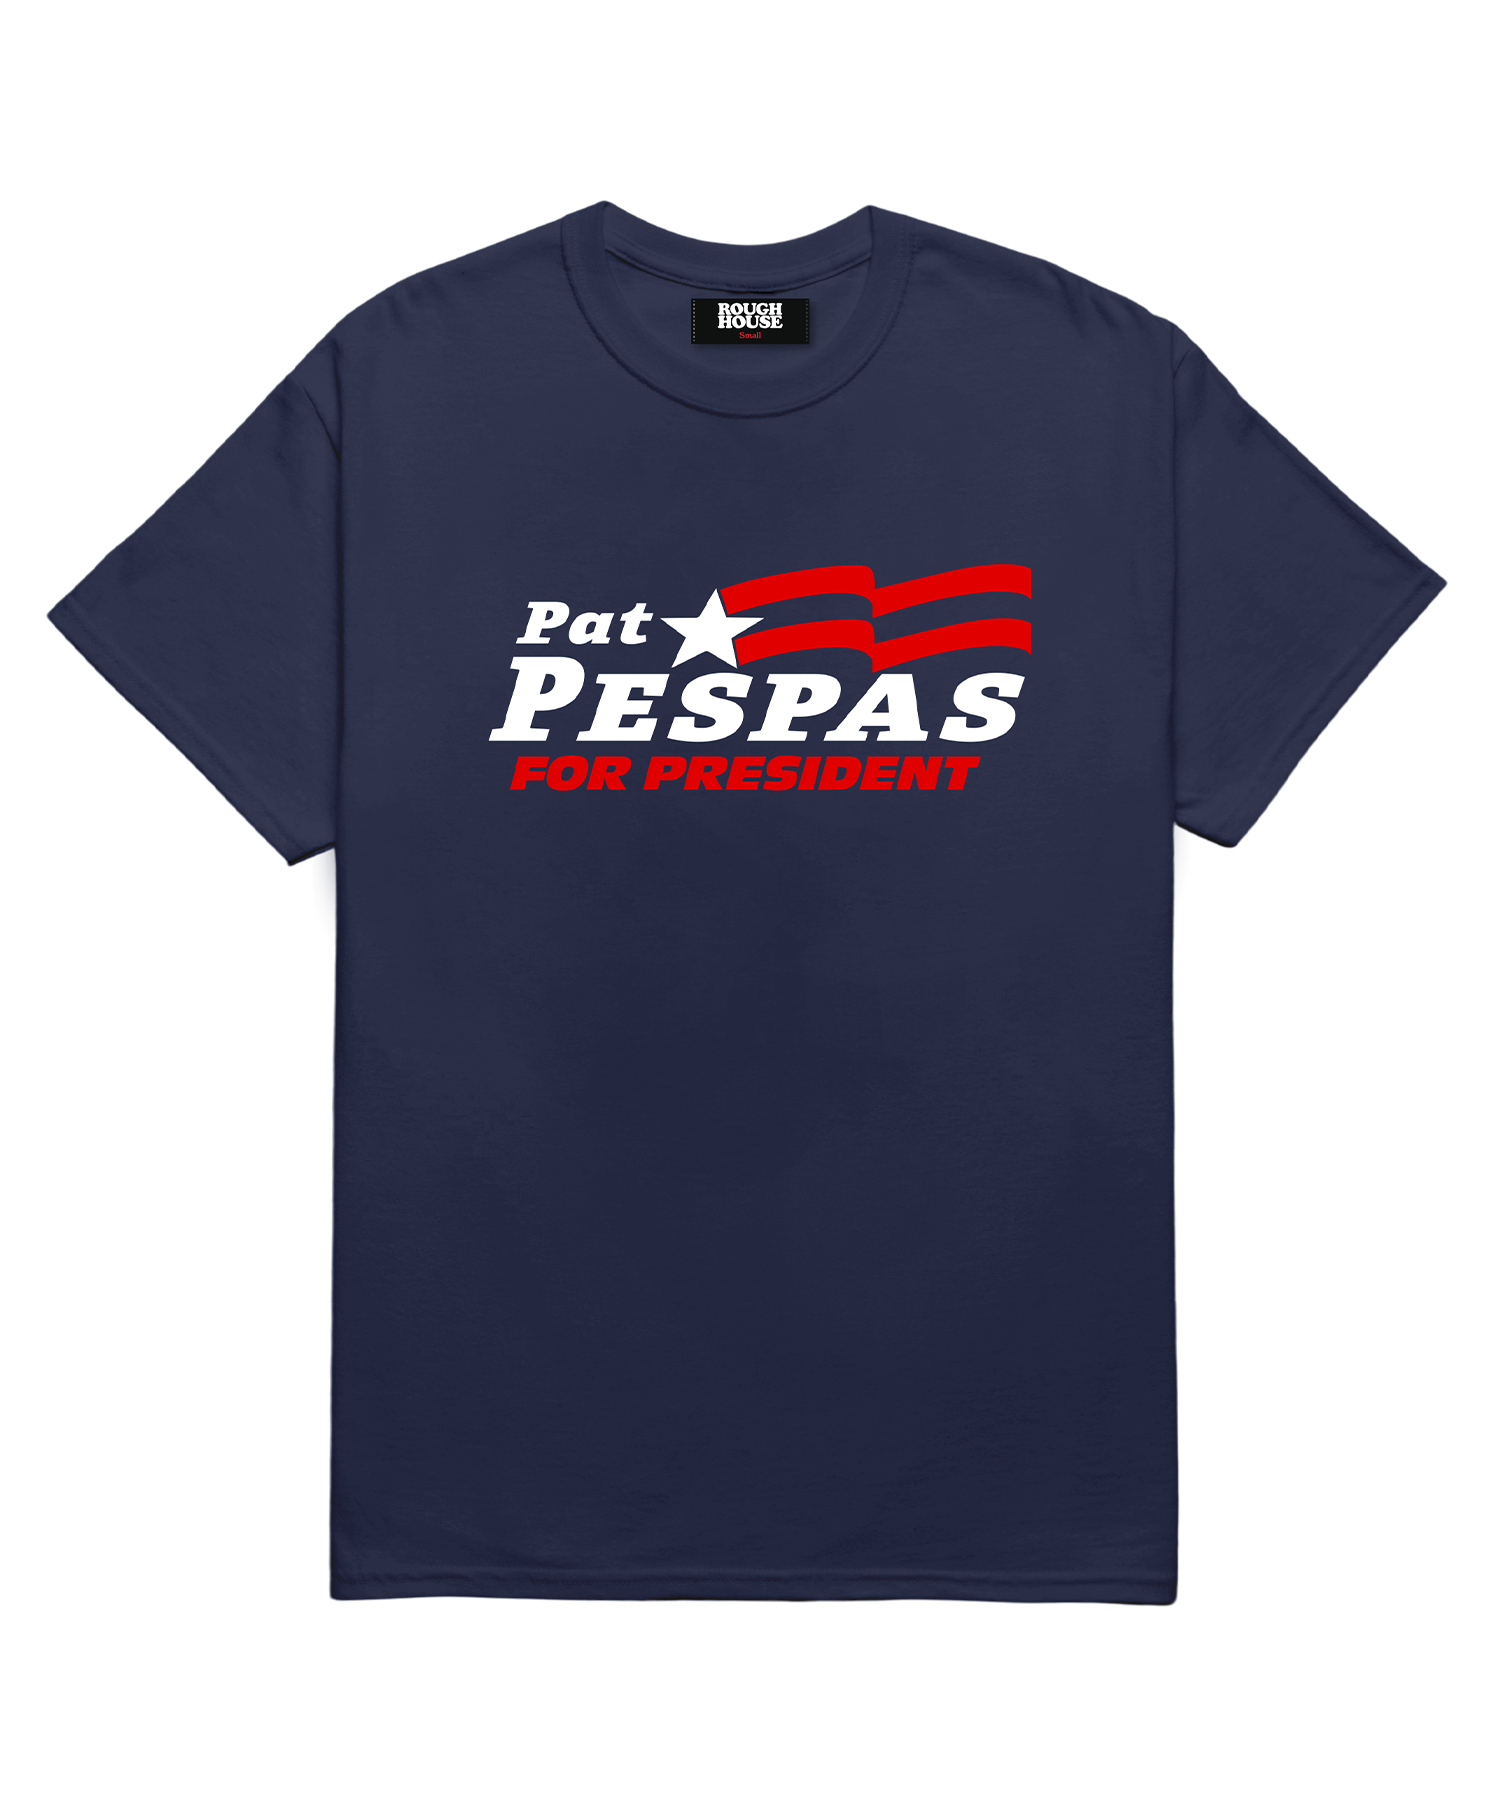 Pat Campaign Tee Navy